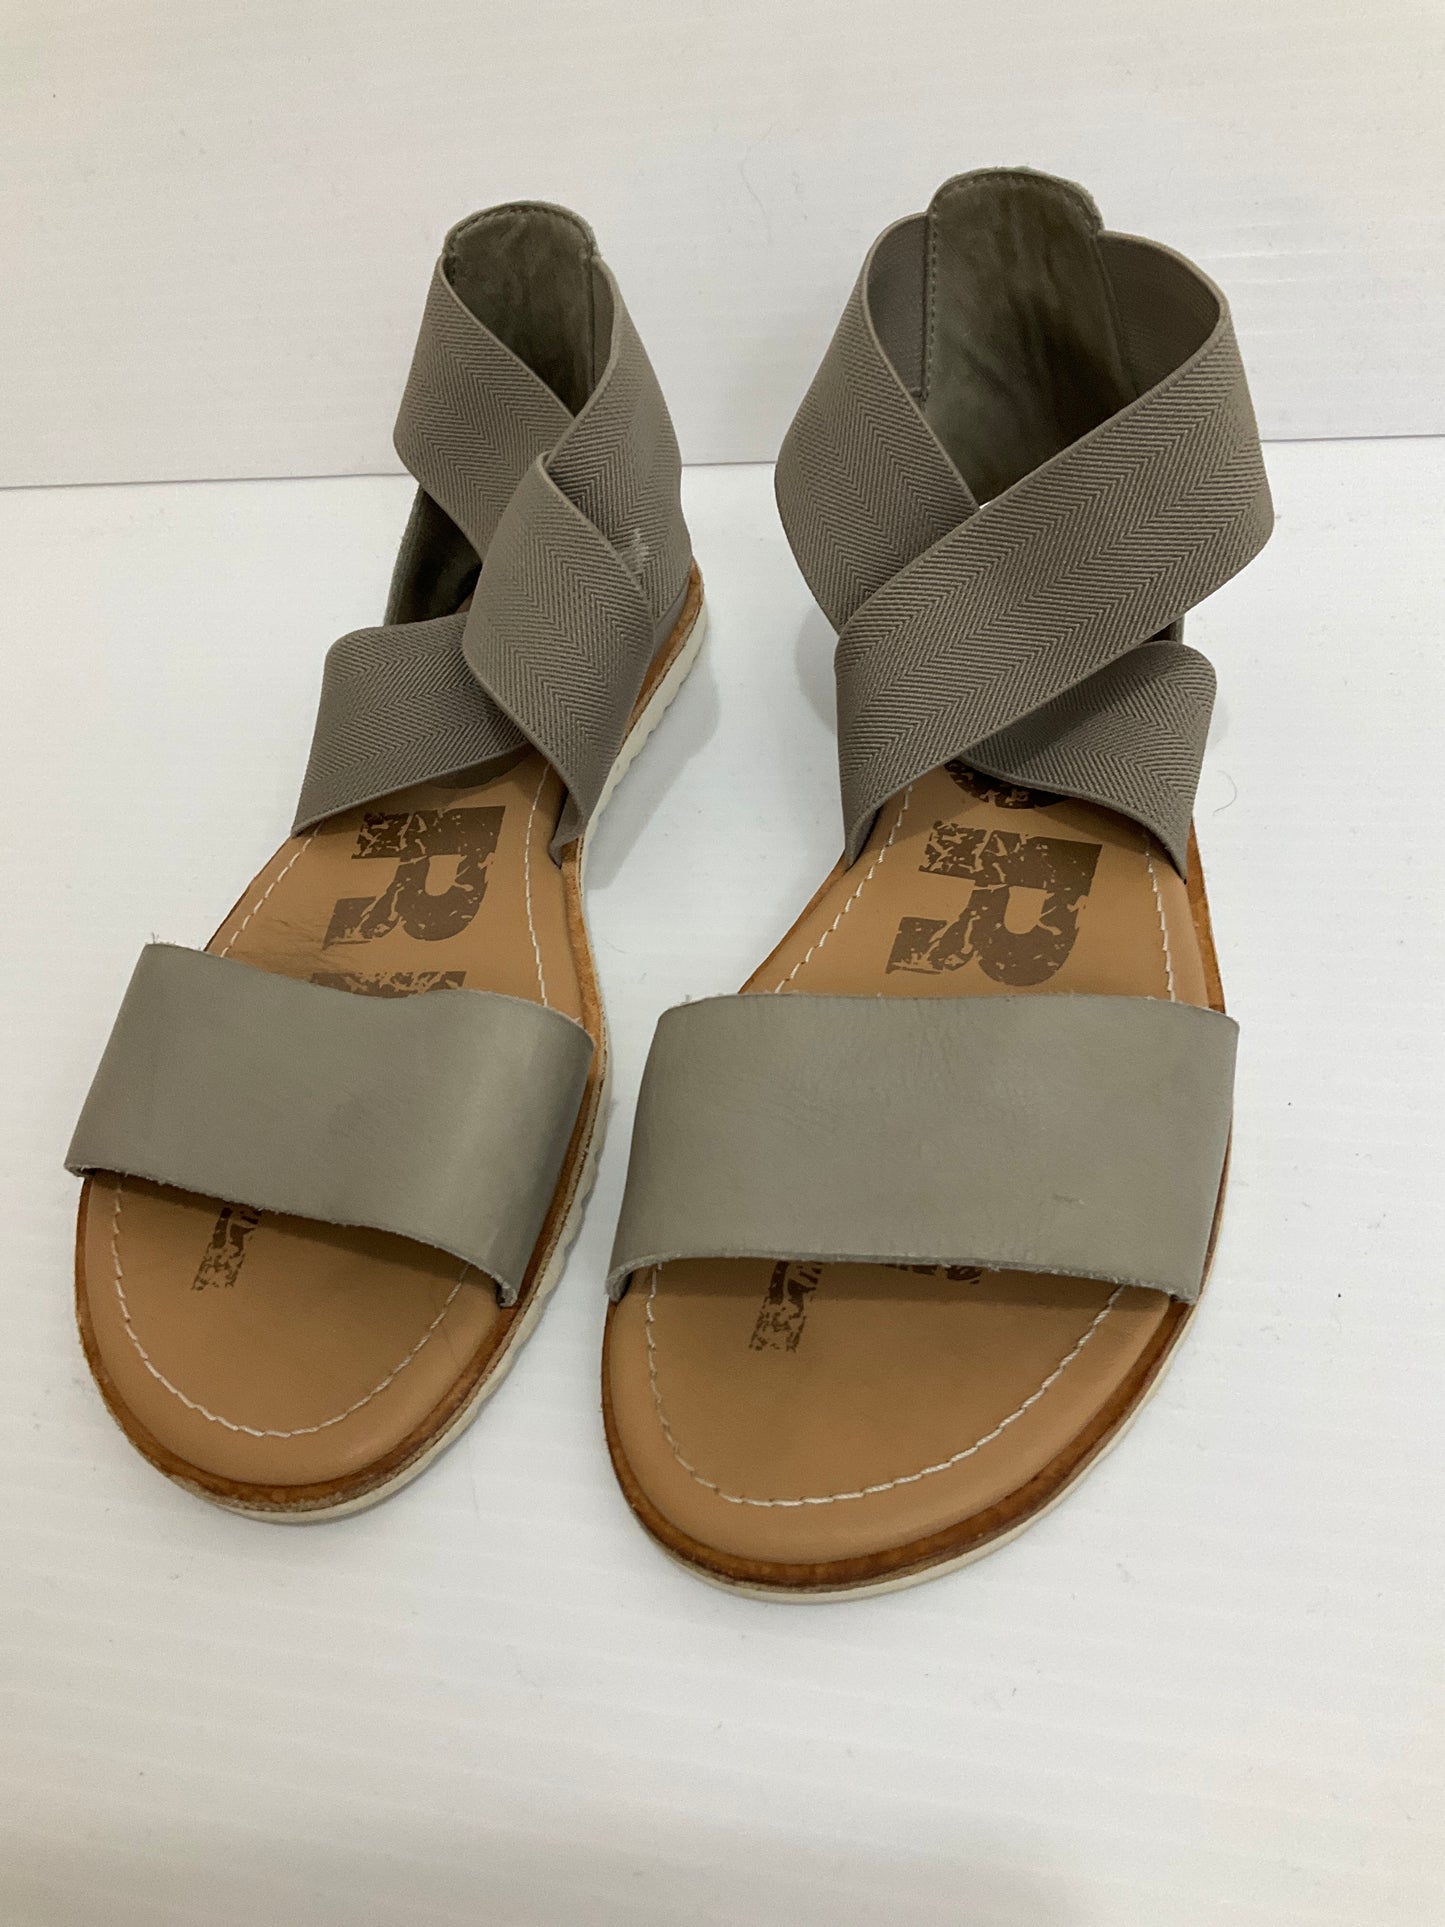 Sandals Flats By Sorel  Size: 6.5